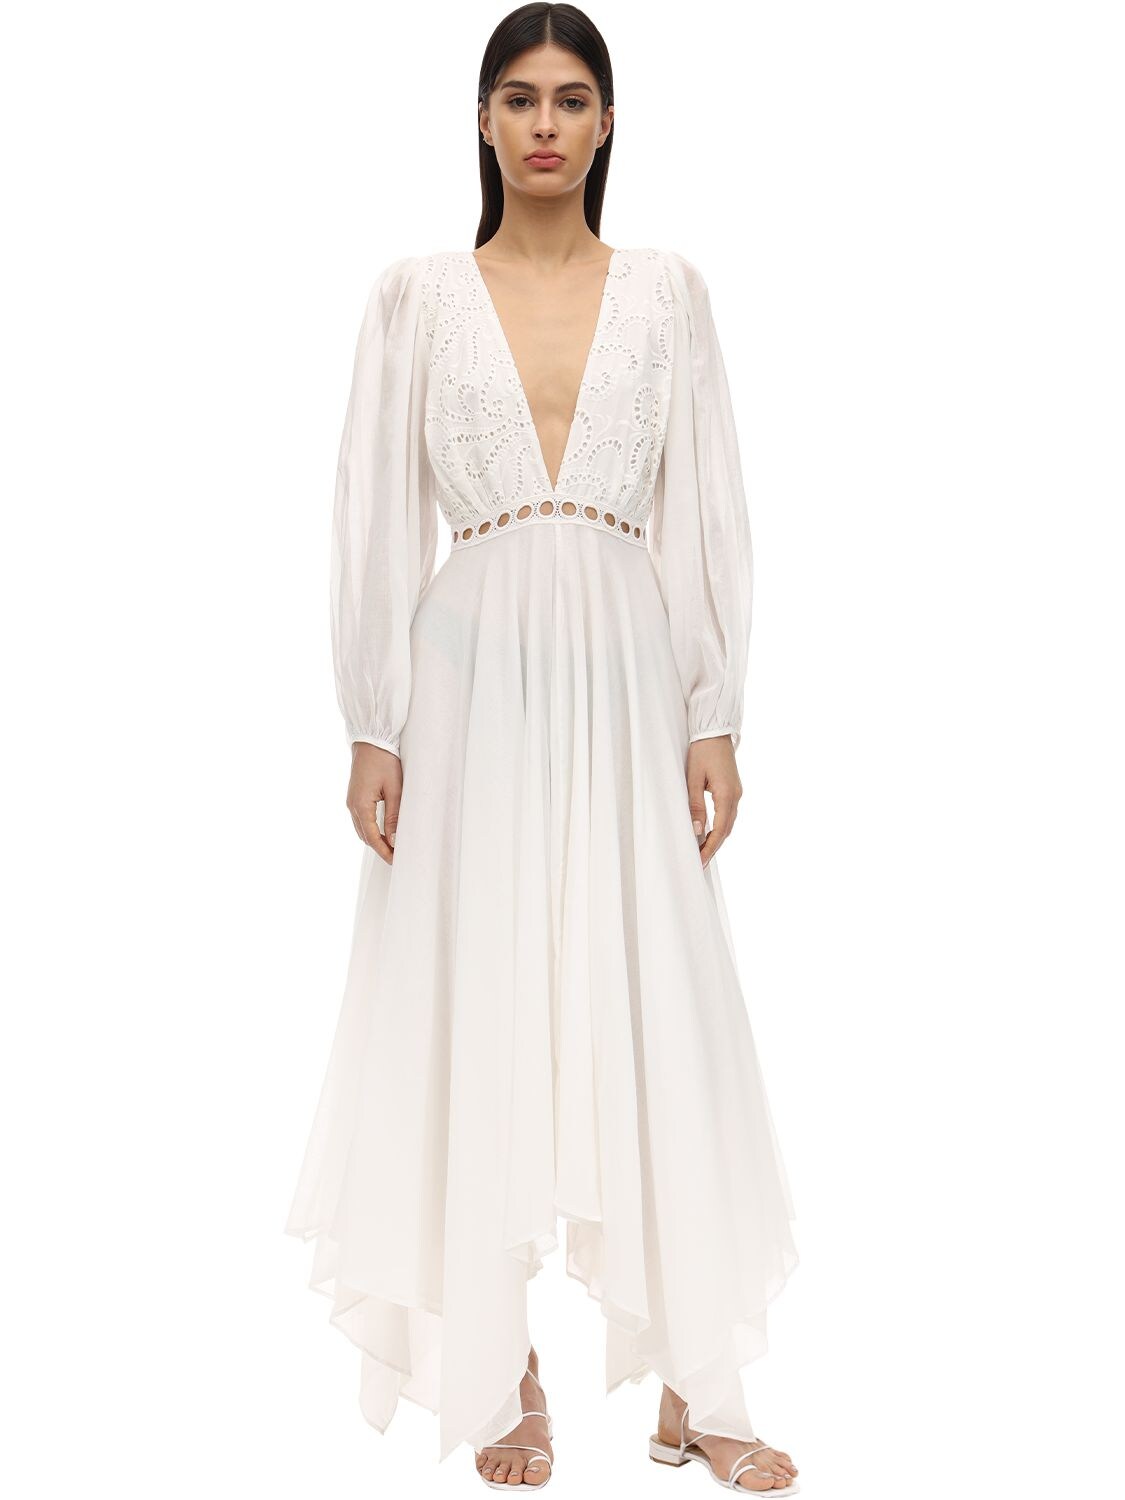 Azulu Tortugas Cotton Eyelet Lace Maxi Dress In Off White